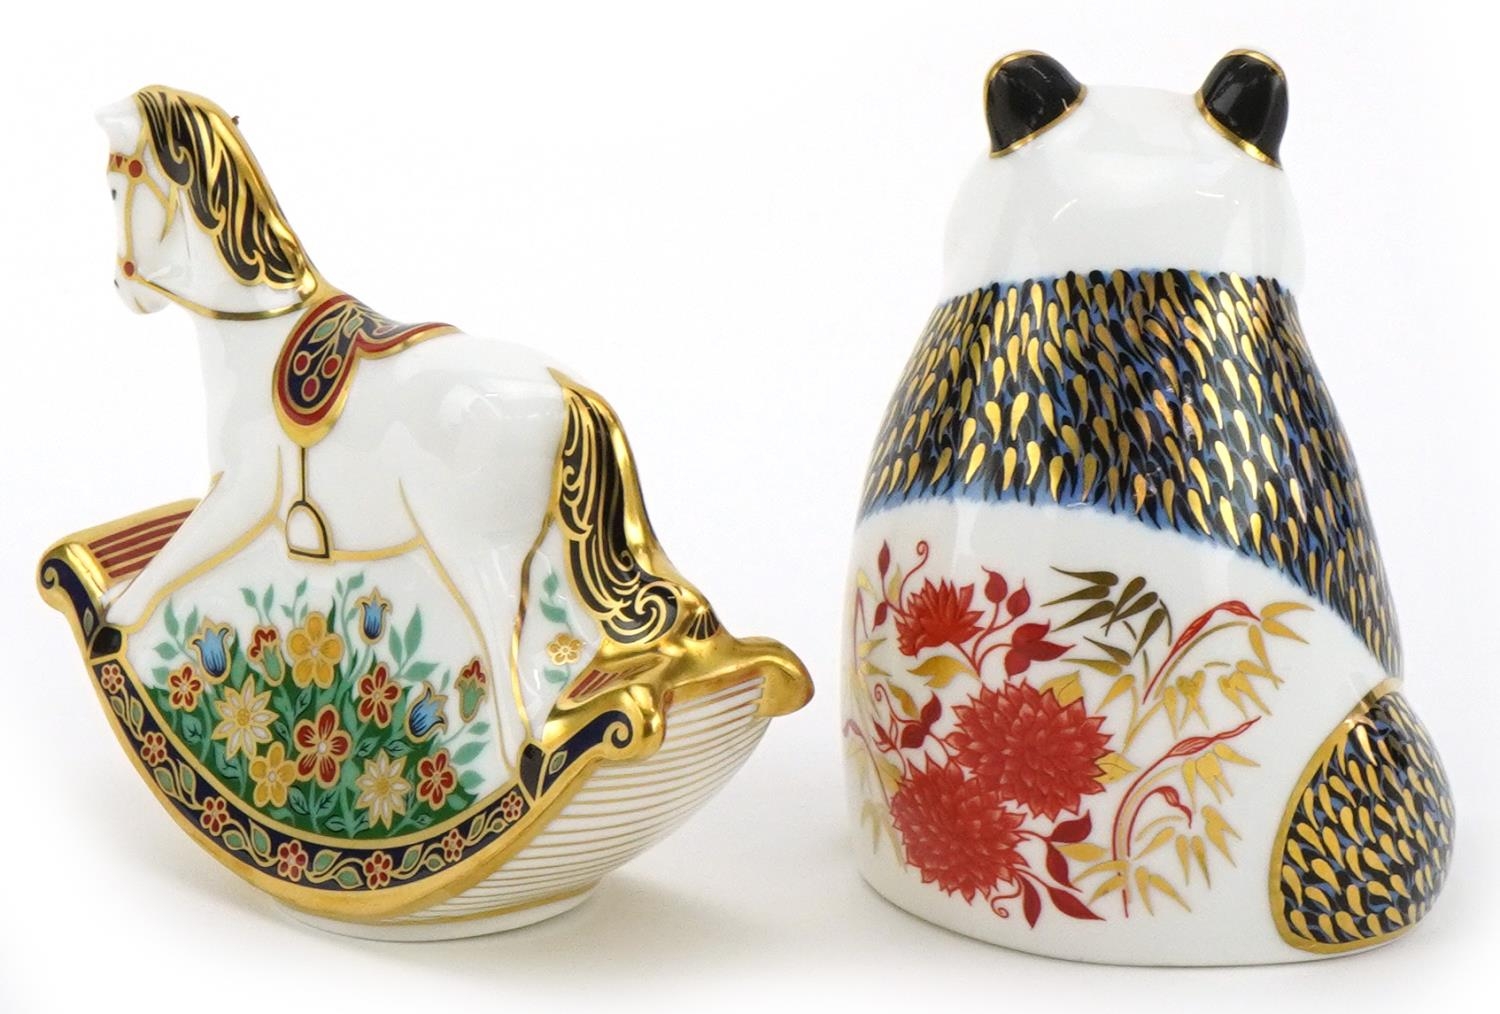 Royal Crown Derby Rocking Horse Treasures of Childhood paperweight with gold stopper and a Panda - Image 2 of 3